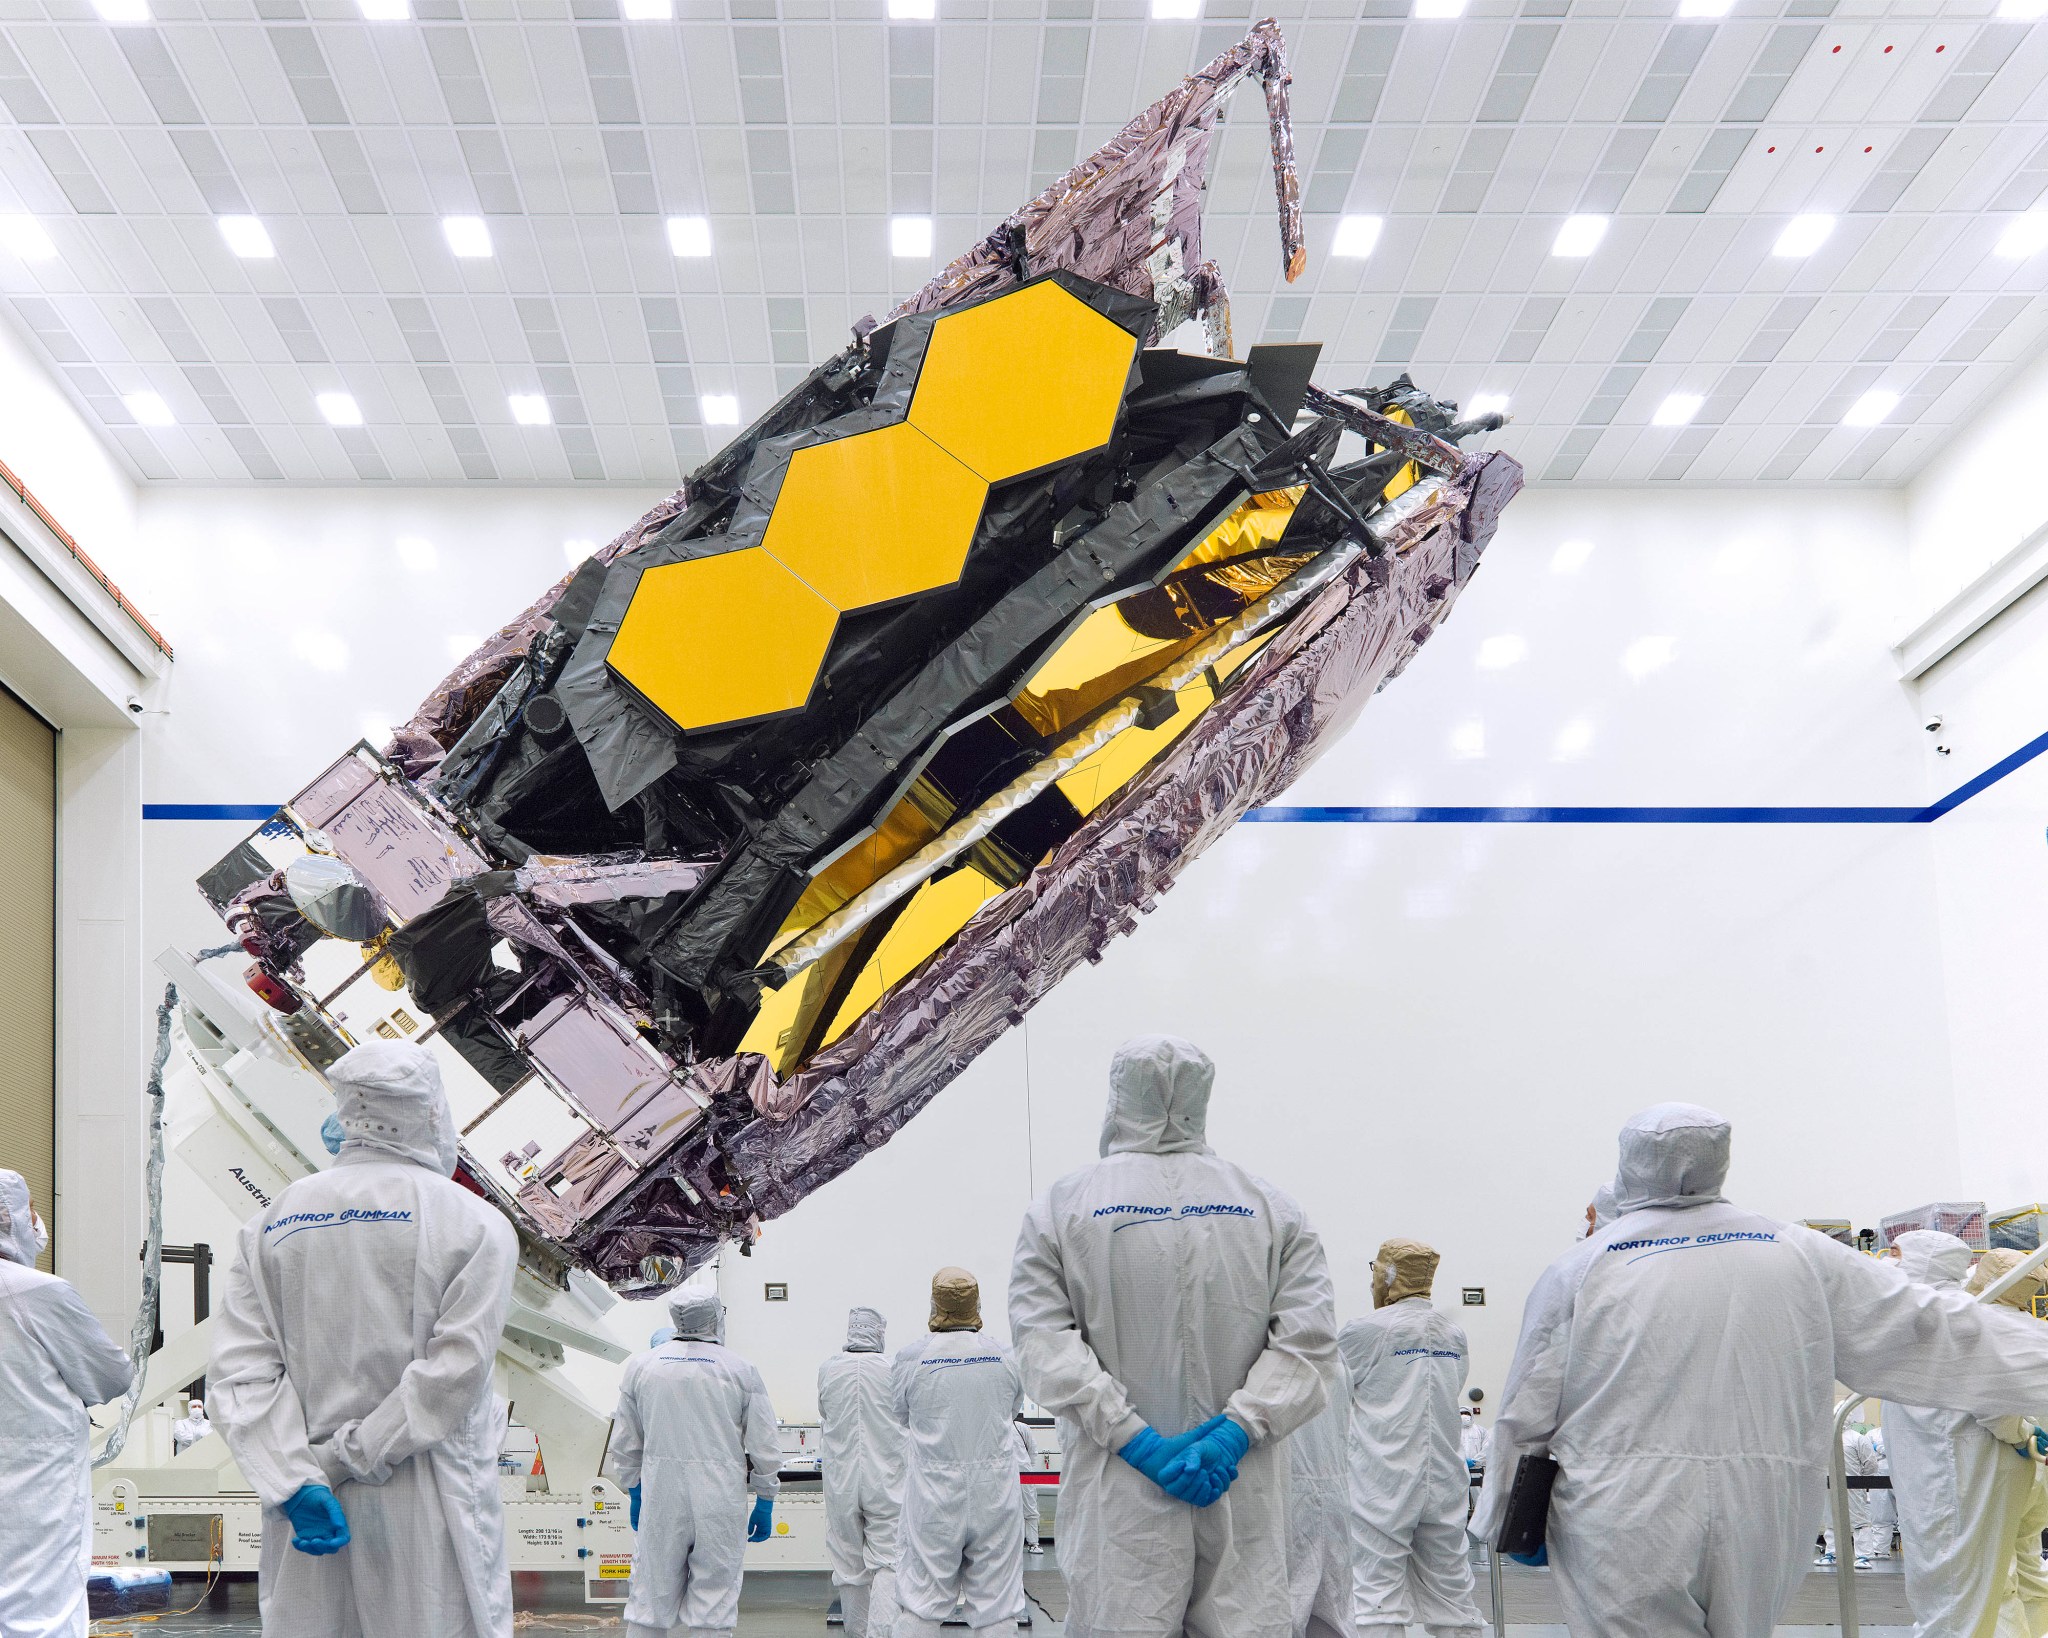 Several cleanroom technicians stand and watch as the Webb telescope, in its folded configuration, is being lifted and horizontally tilted towards the right side. When folded, Webb’s purple, metallic pallets surround its hexagonal, gold-coated mirror segments, making a long rectangle shape. The technicians wear blue gloves and white contamination-control suits that have the blue Northrop Grumman logo on the back. This image was taken in the Northrop Grumman cleanroom, which features a blue line running across its bright white walls.